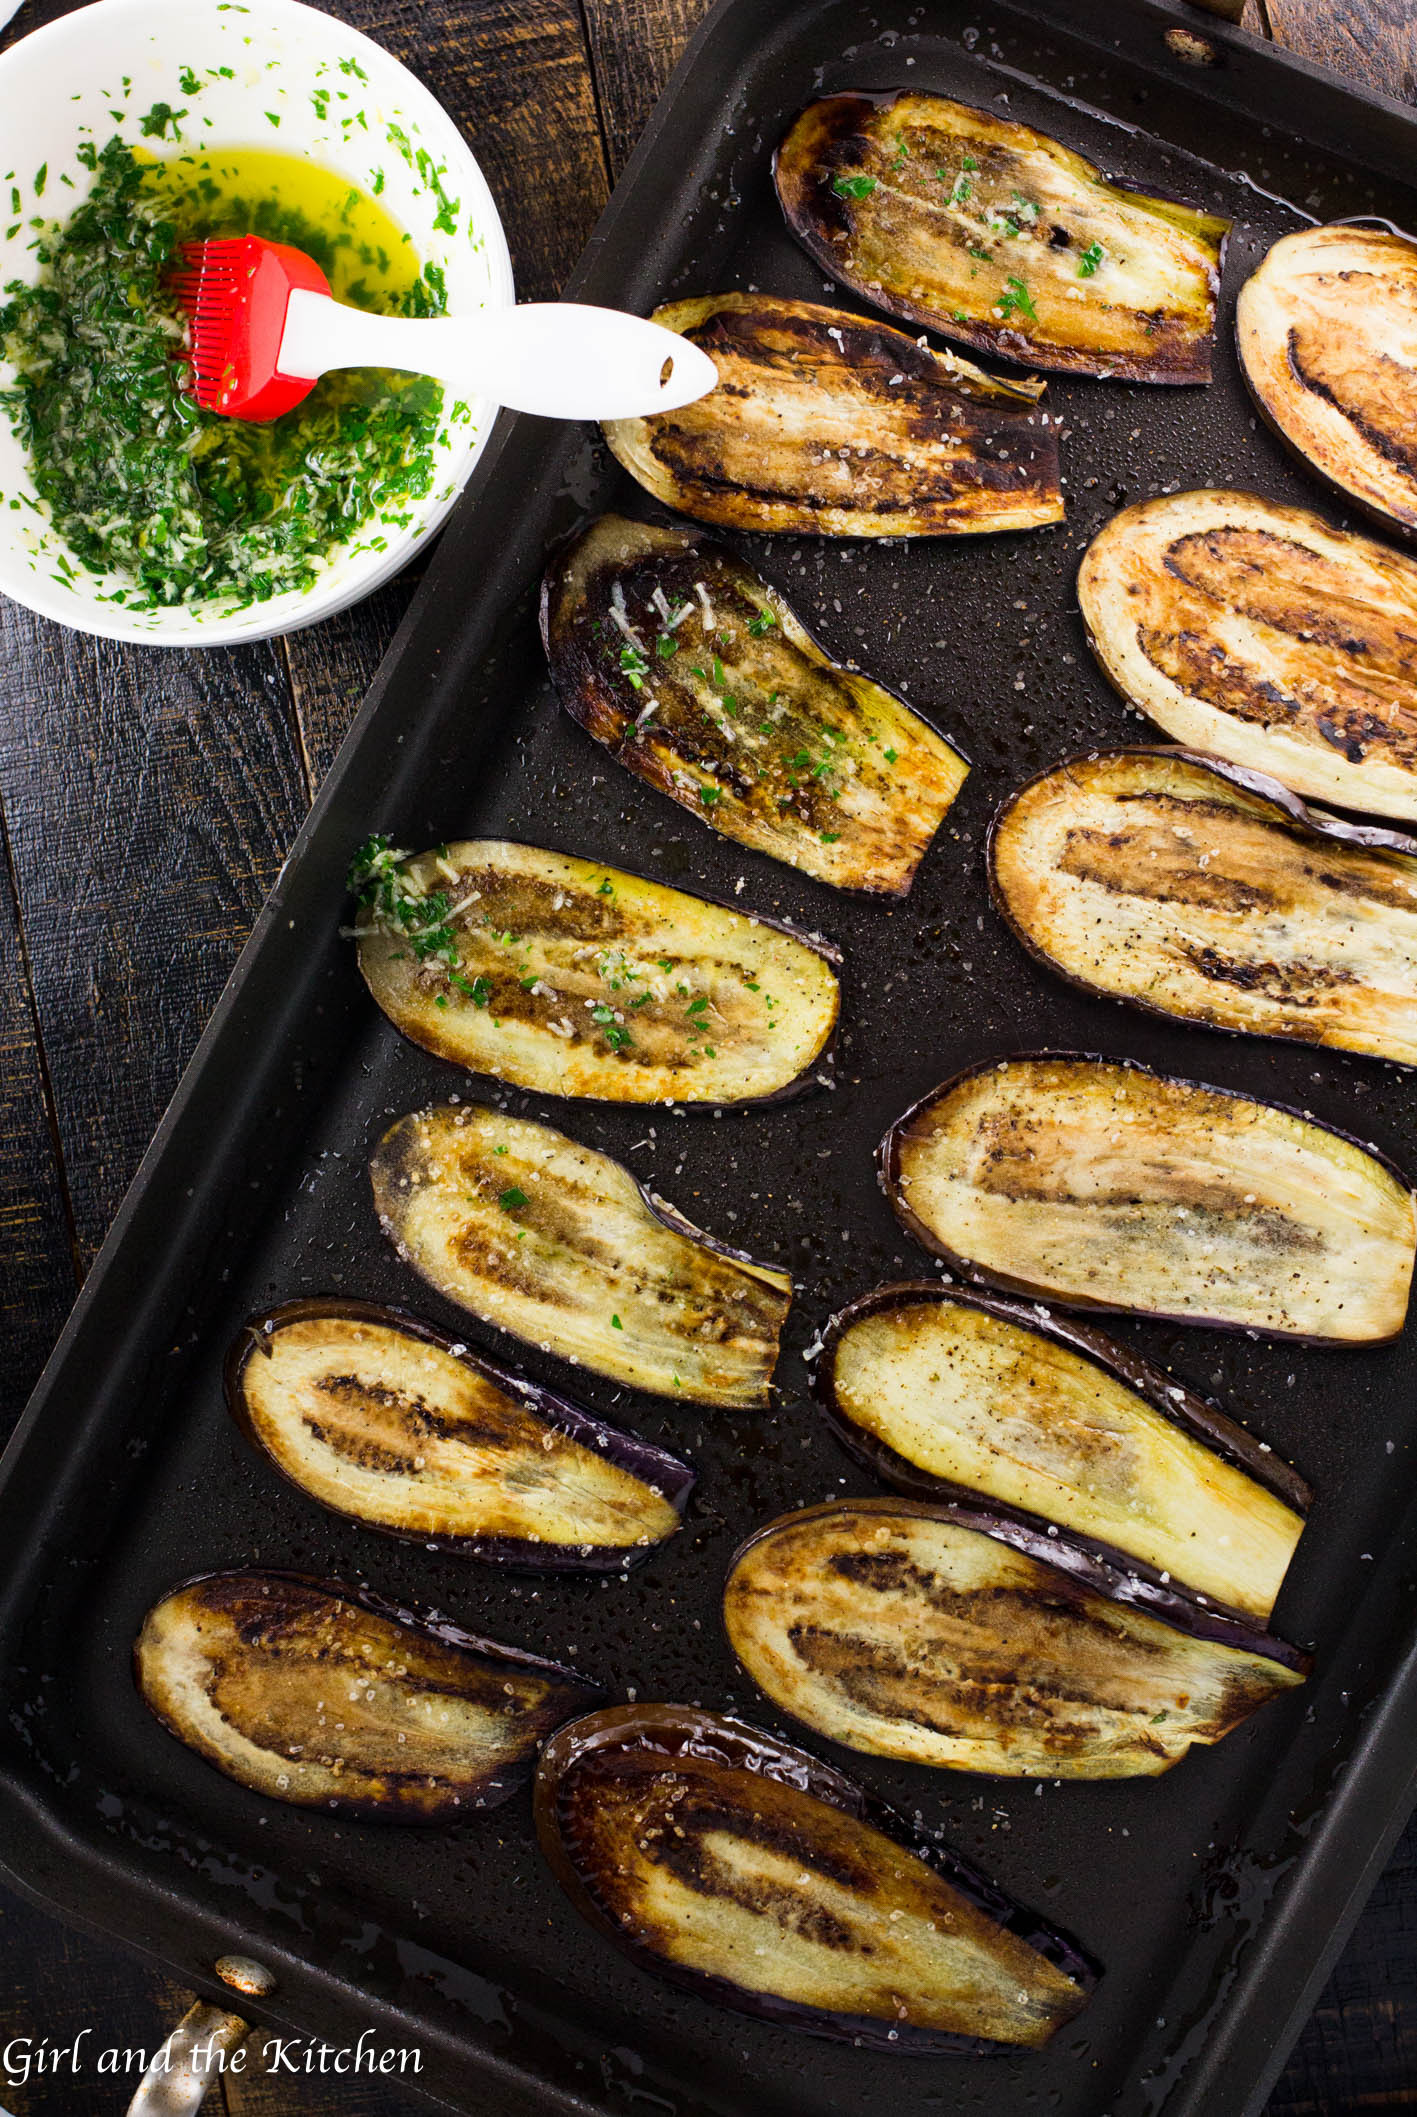 Fried Eggplant Recipes Lovely Healthy Pan Fried Baby Eggplant with Gremolata Girl and